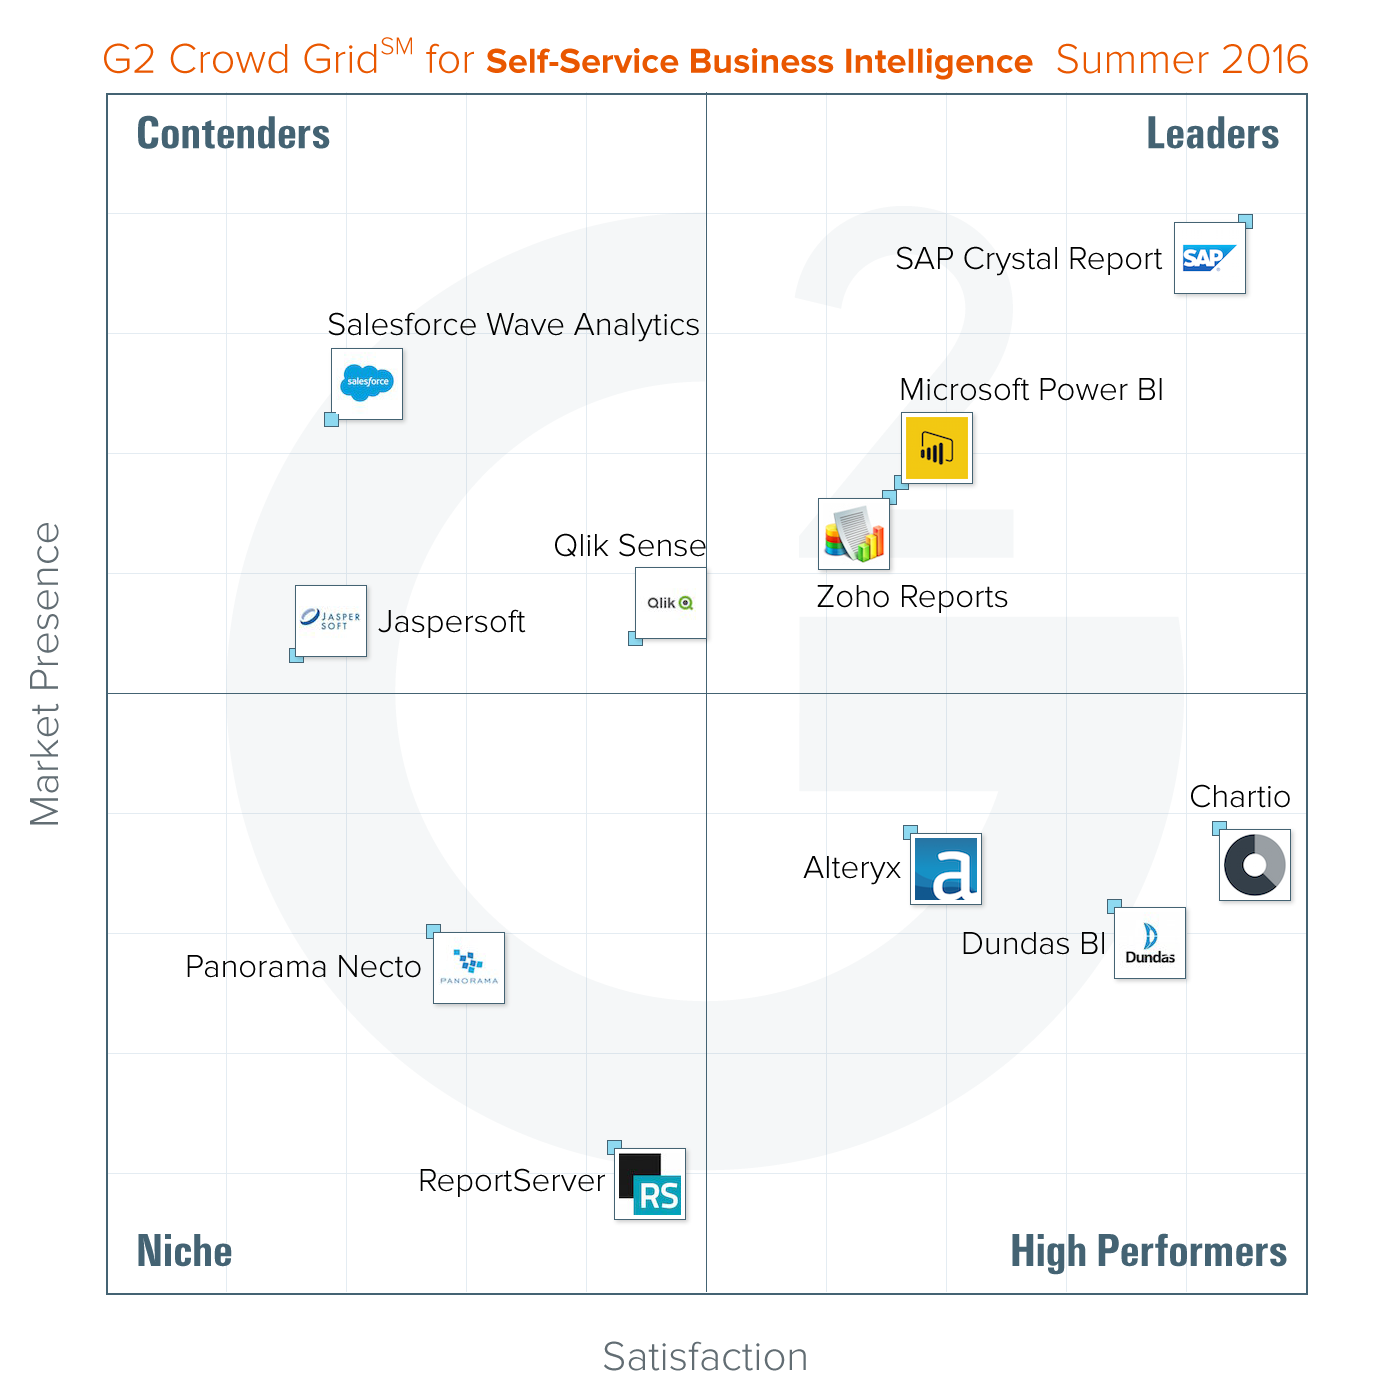 G2 Crowd Names Izenda As A High Performer In Embedded Self Service Business Intelligence Grids